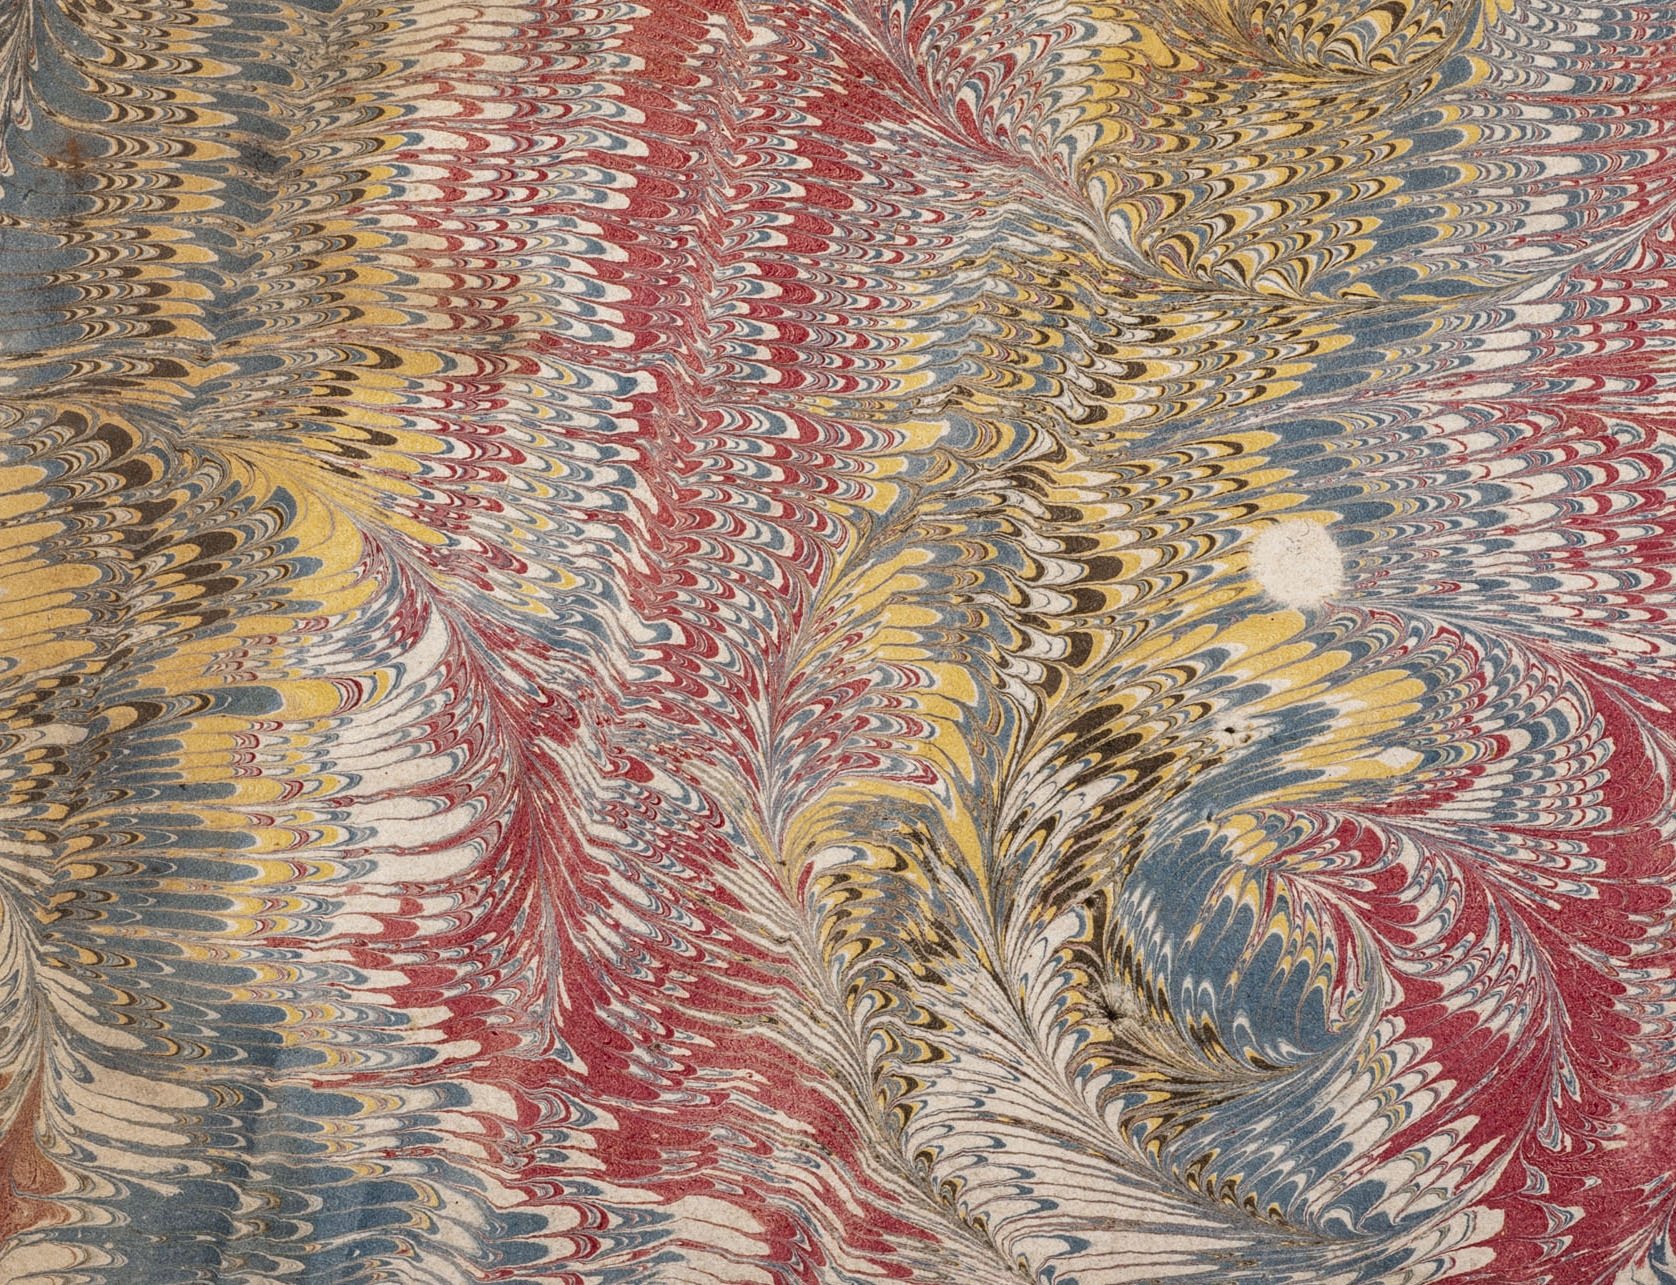 Marbling art was an integral part of the visual culture of Ottoman manuscripts. (Courtesy of Istanbul Research Institute)